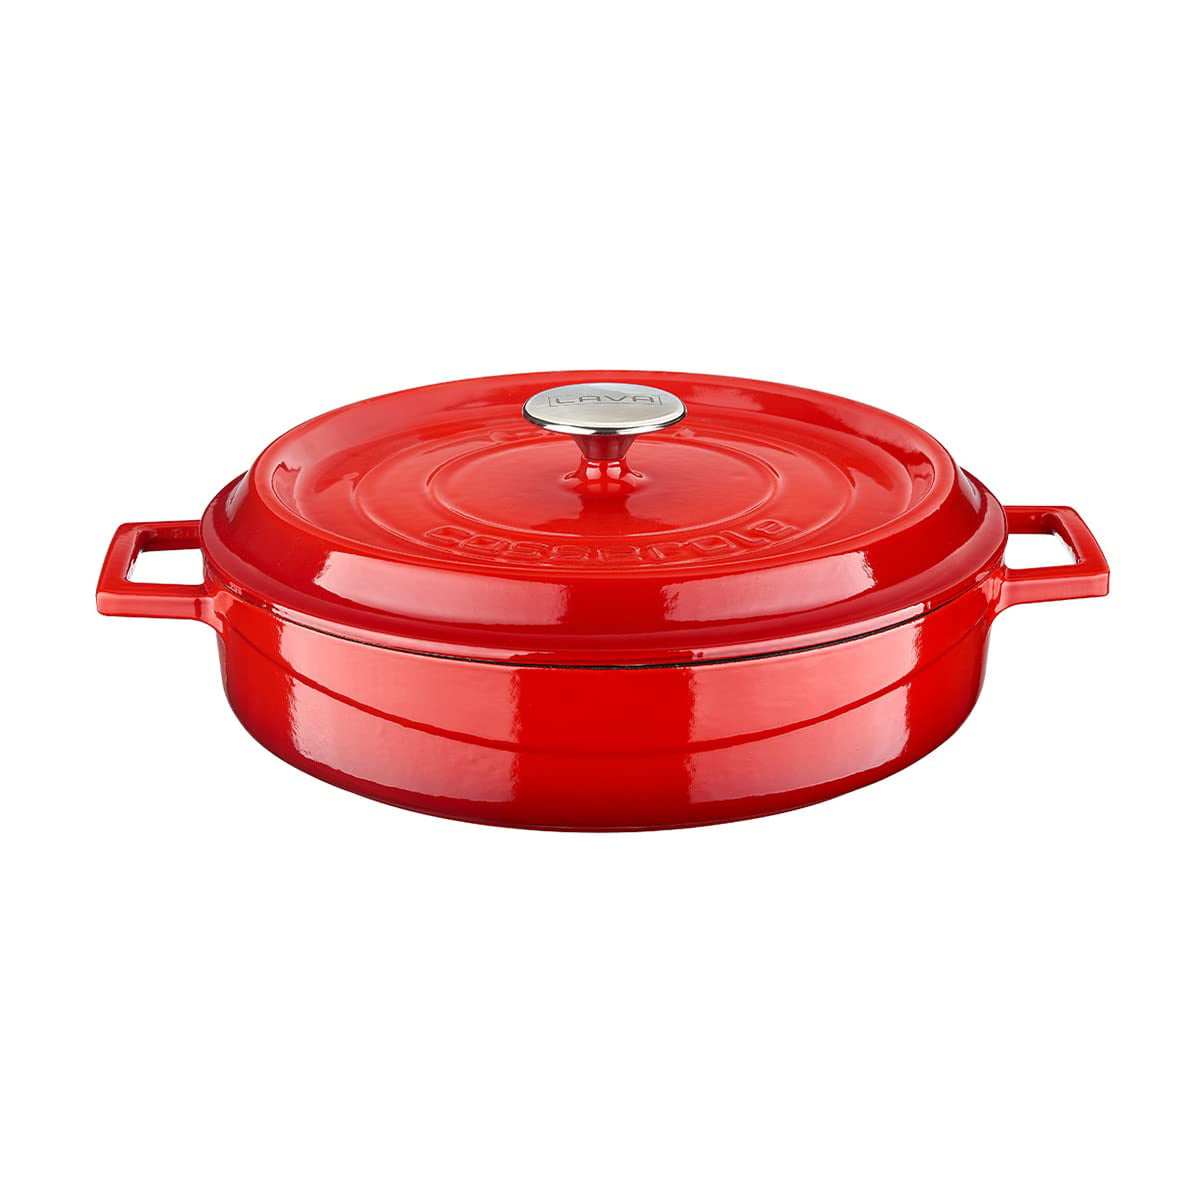 Dash of That Dutch Oven with Lid - Red, 6 qt - Kroger